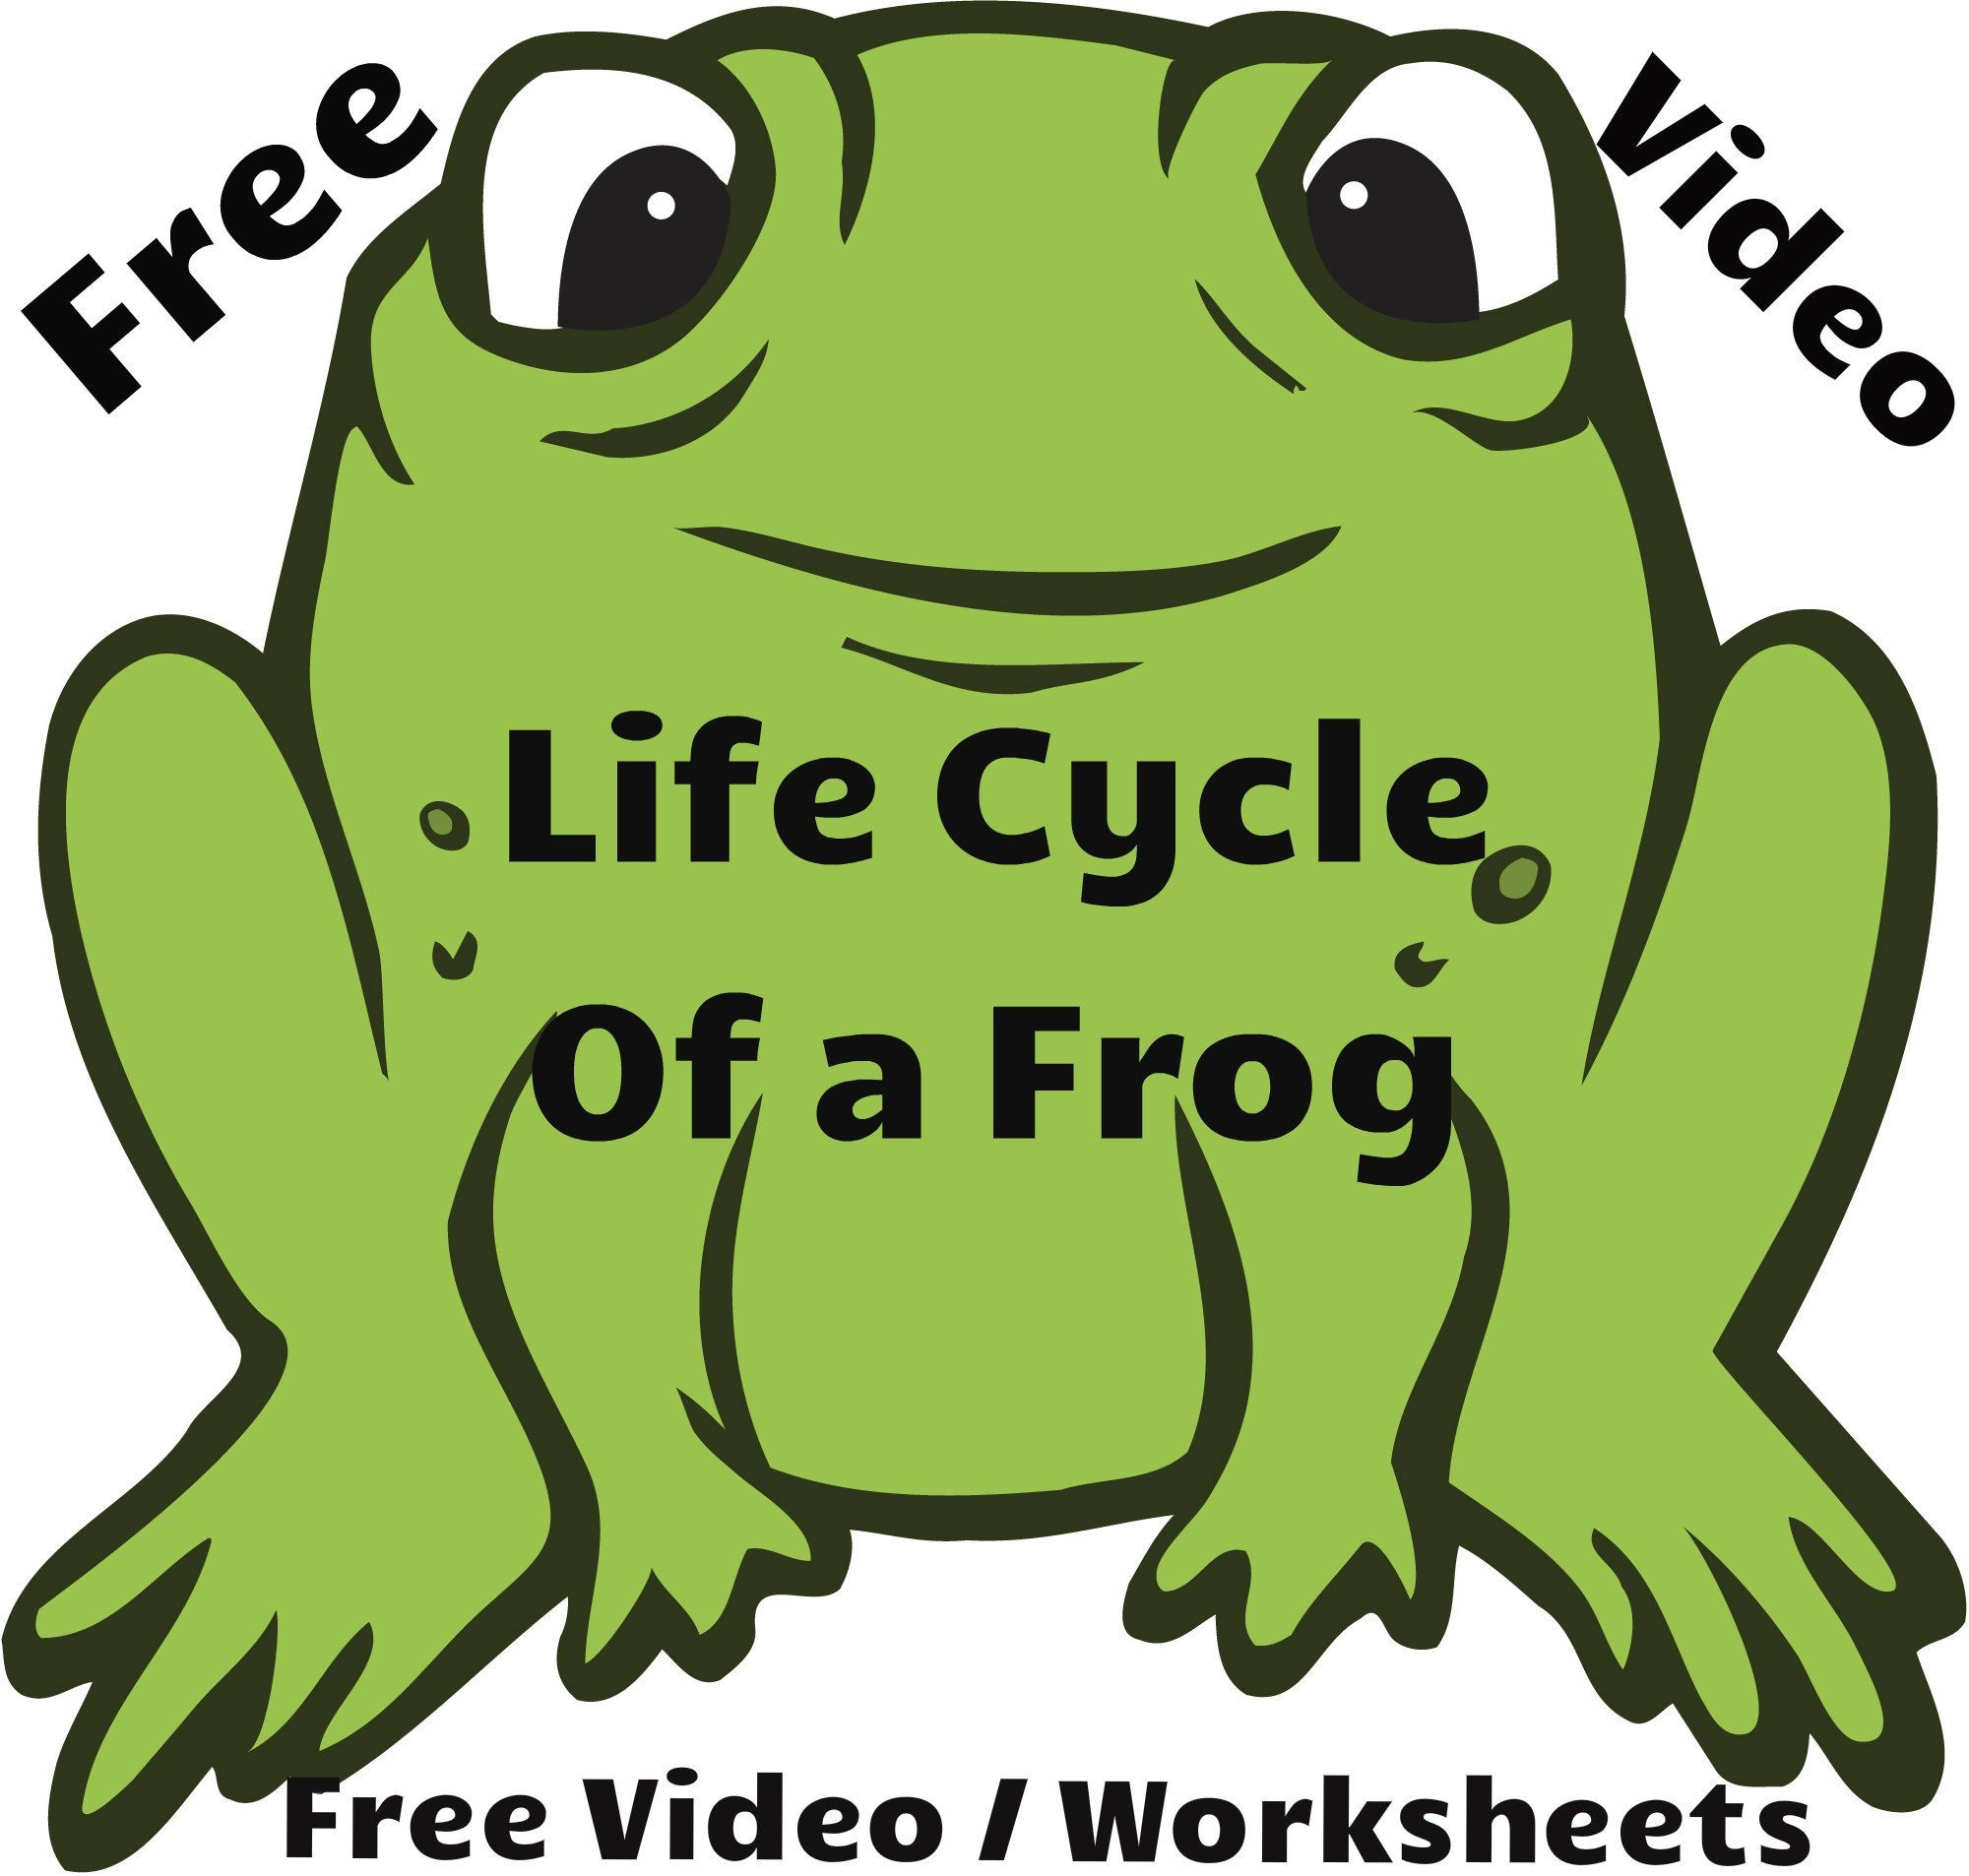 Frog Papercraft Free Video Lesson Life Cycle Of A Frog Along with the Video I